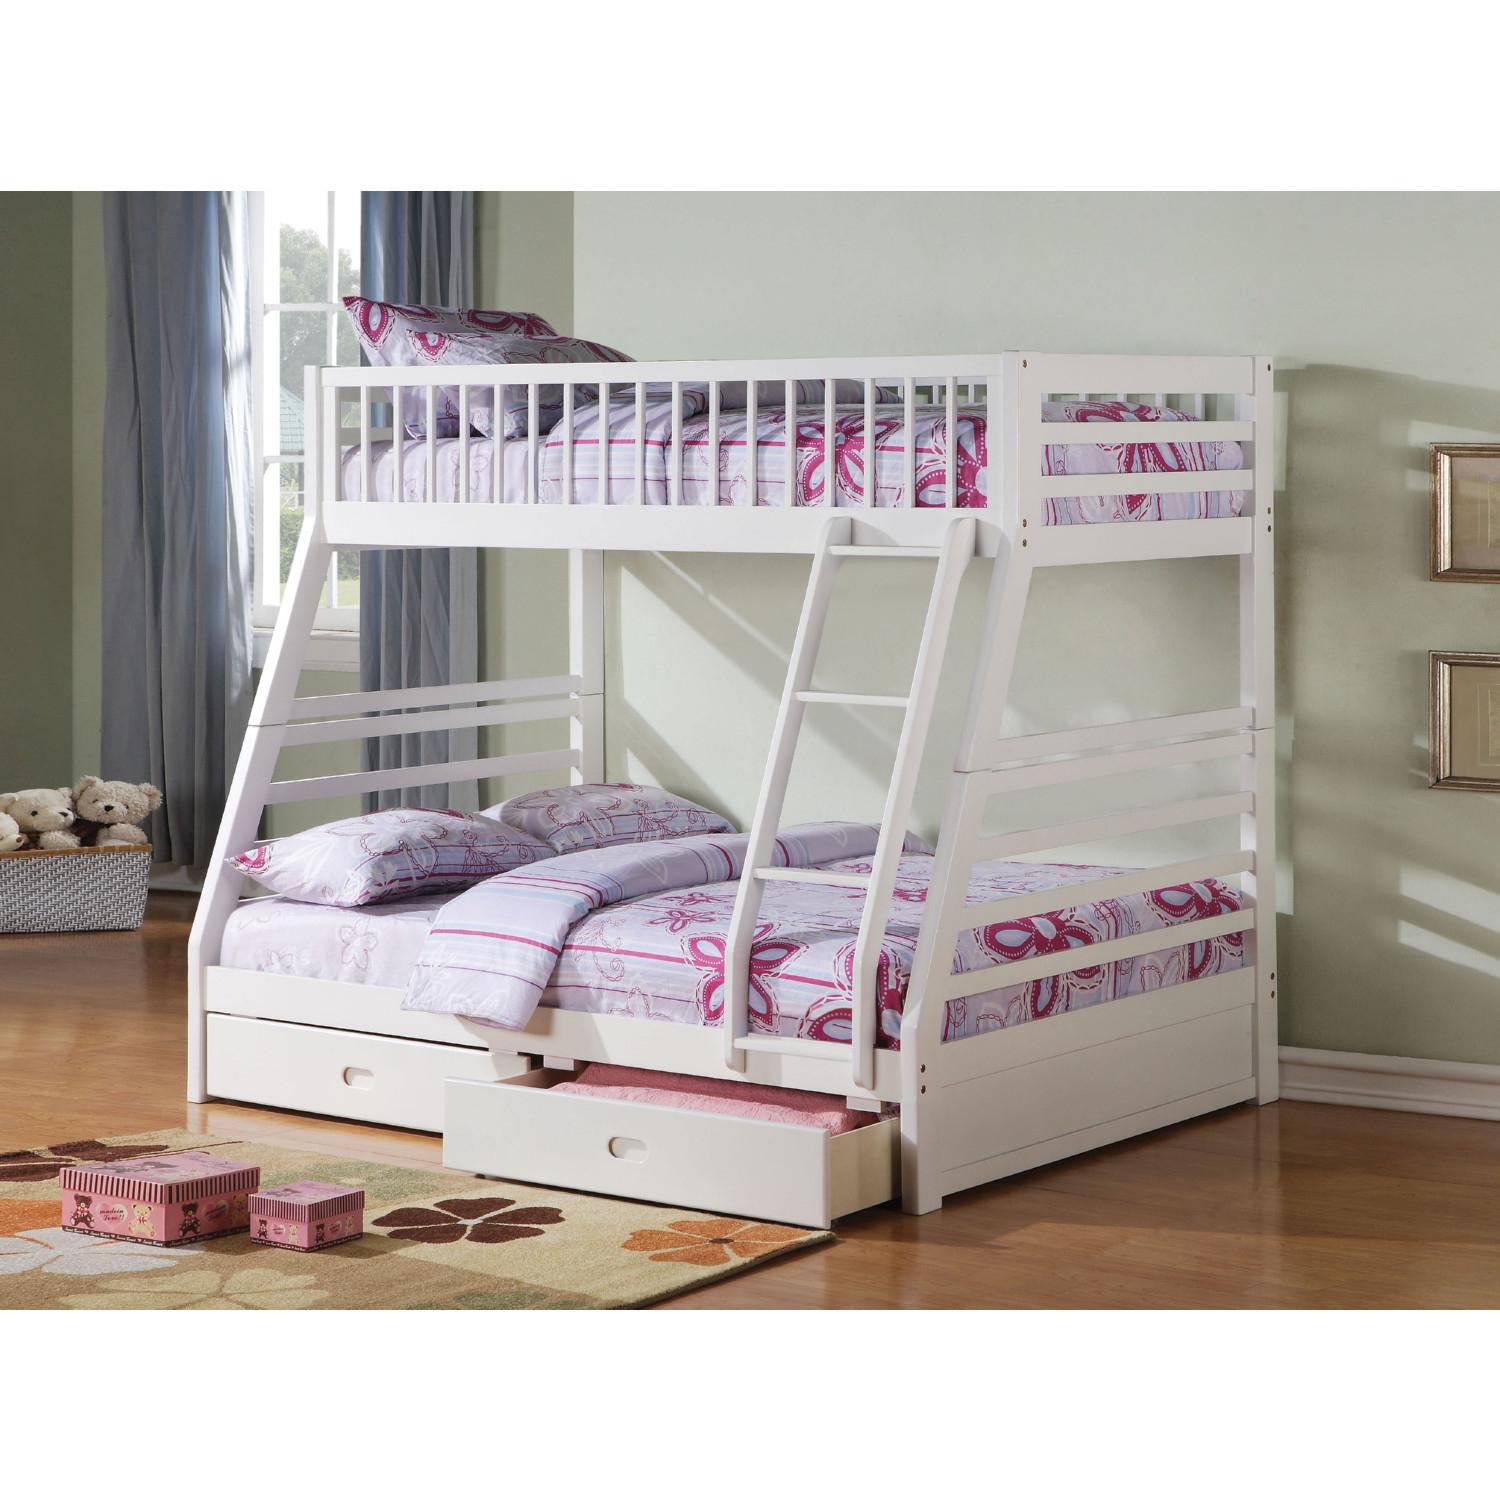 

    
Transitional White Twin/Full Bunk Bed by Acme Jason 37040
